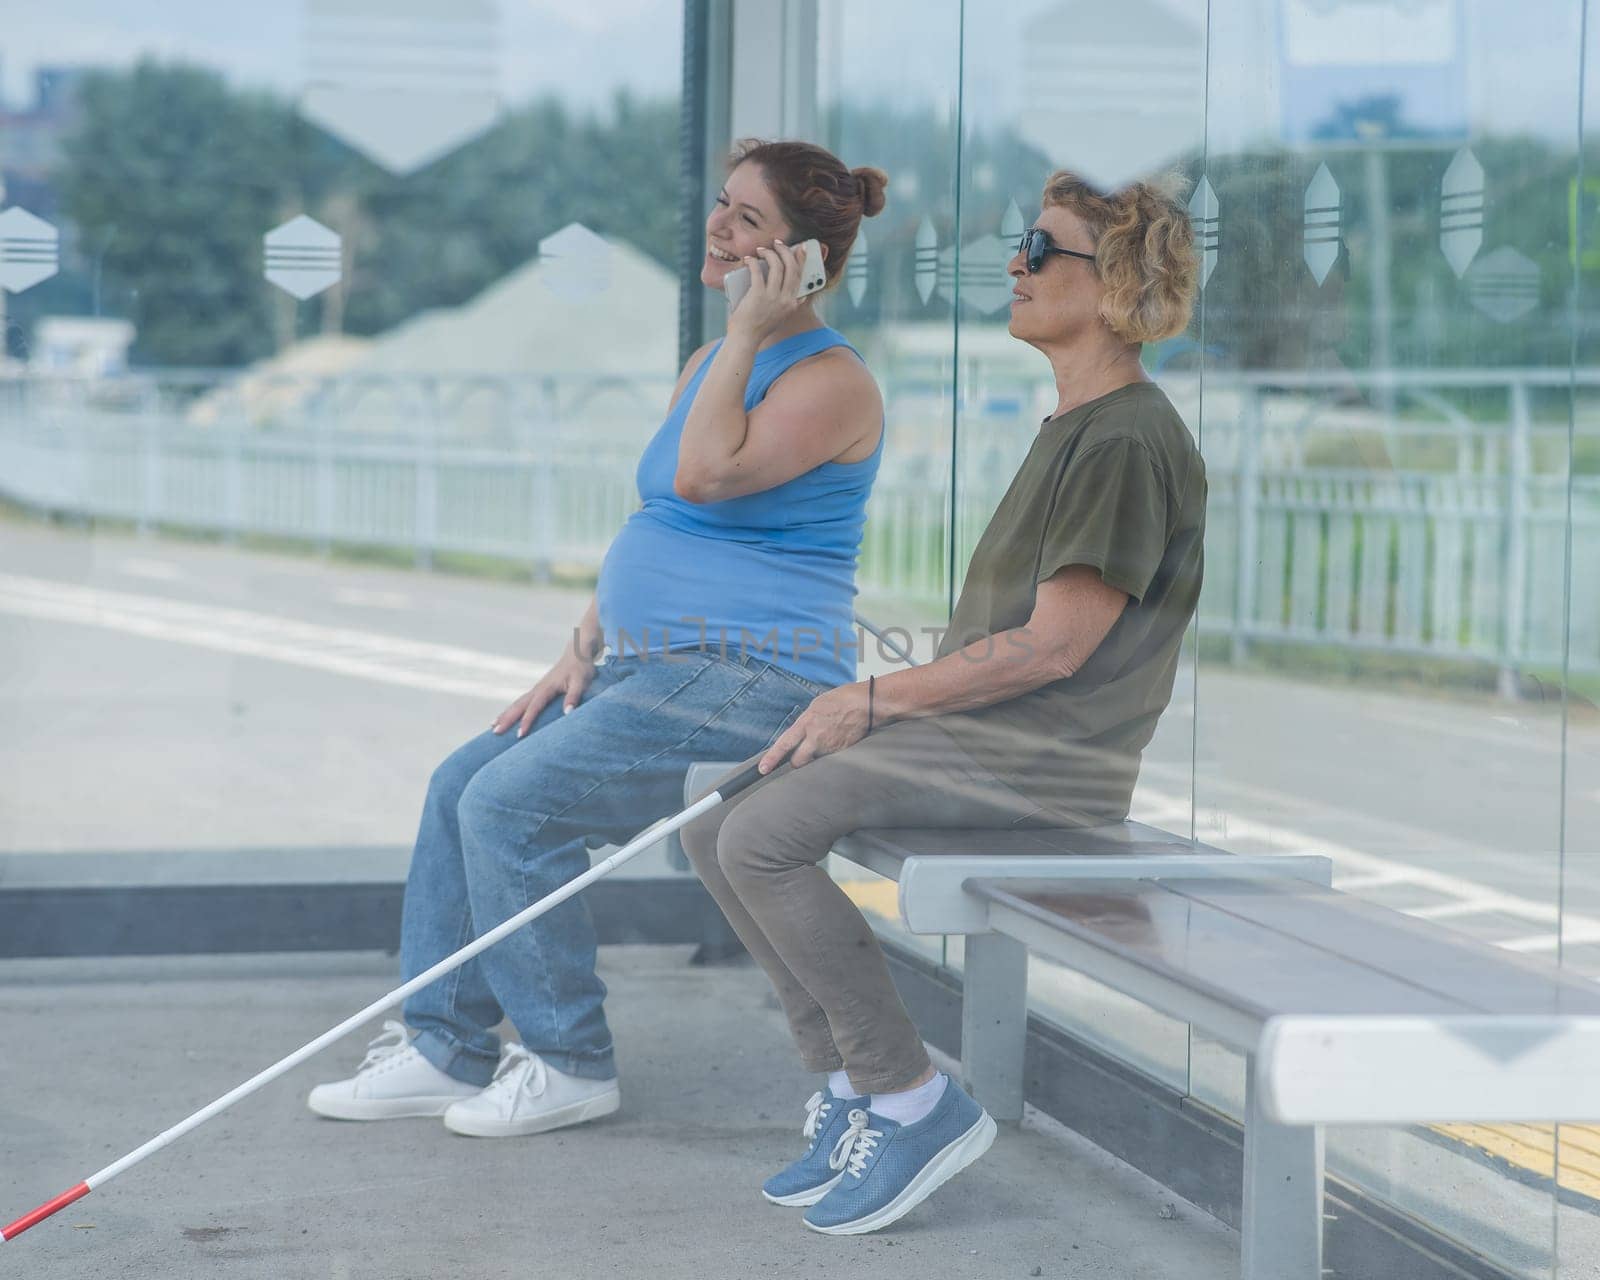 An elderly blind woman and a pregnant woman are sitting at a bus stop and waiting for the bus